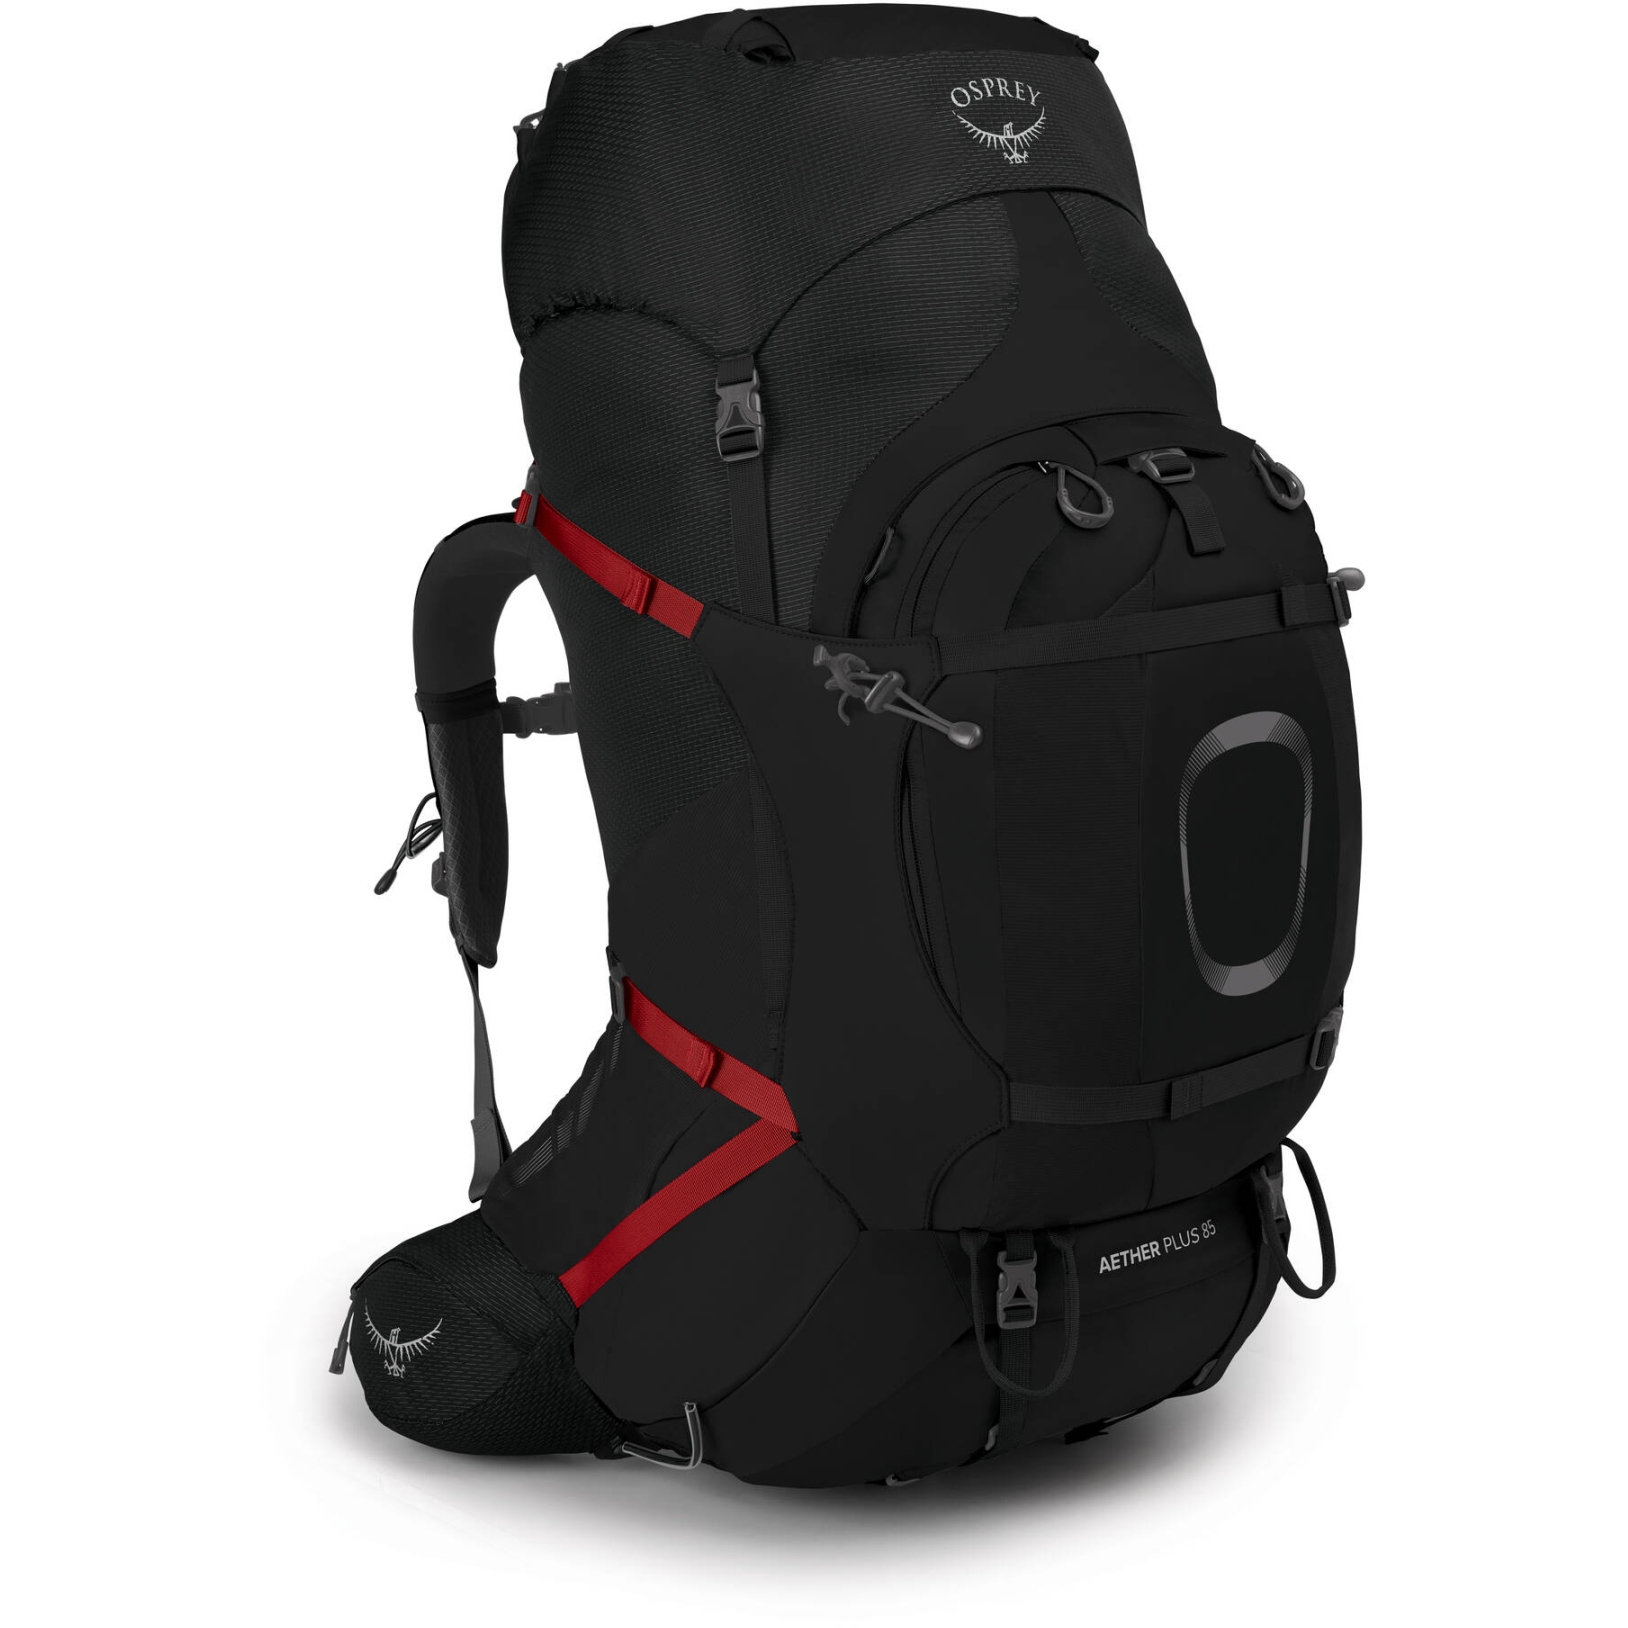 Picture of Osprey Aether Plus 85 Backpack - Black - S/M